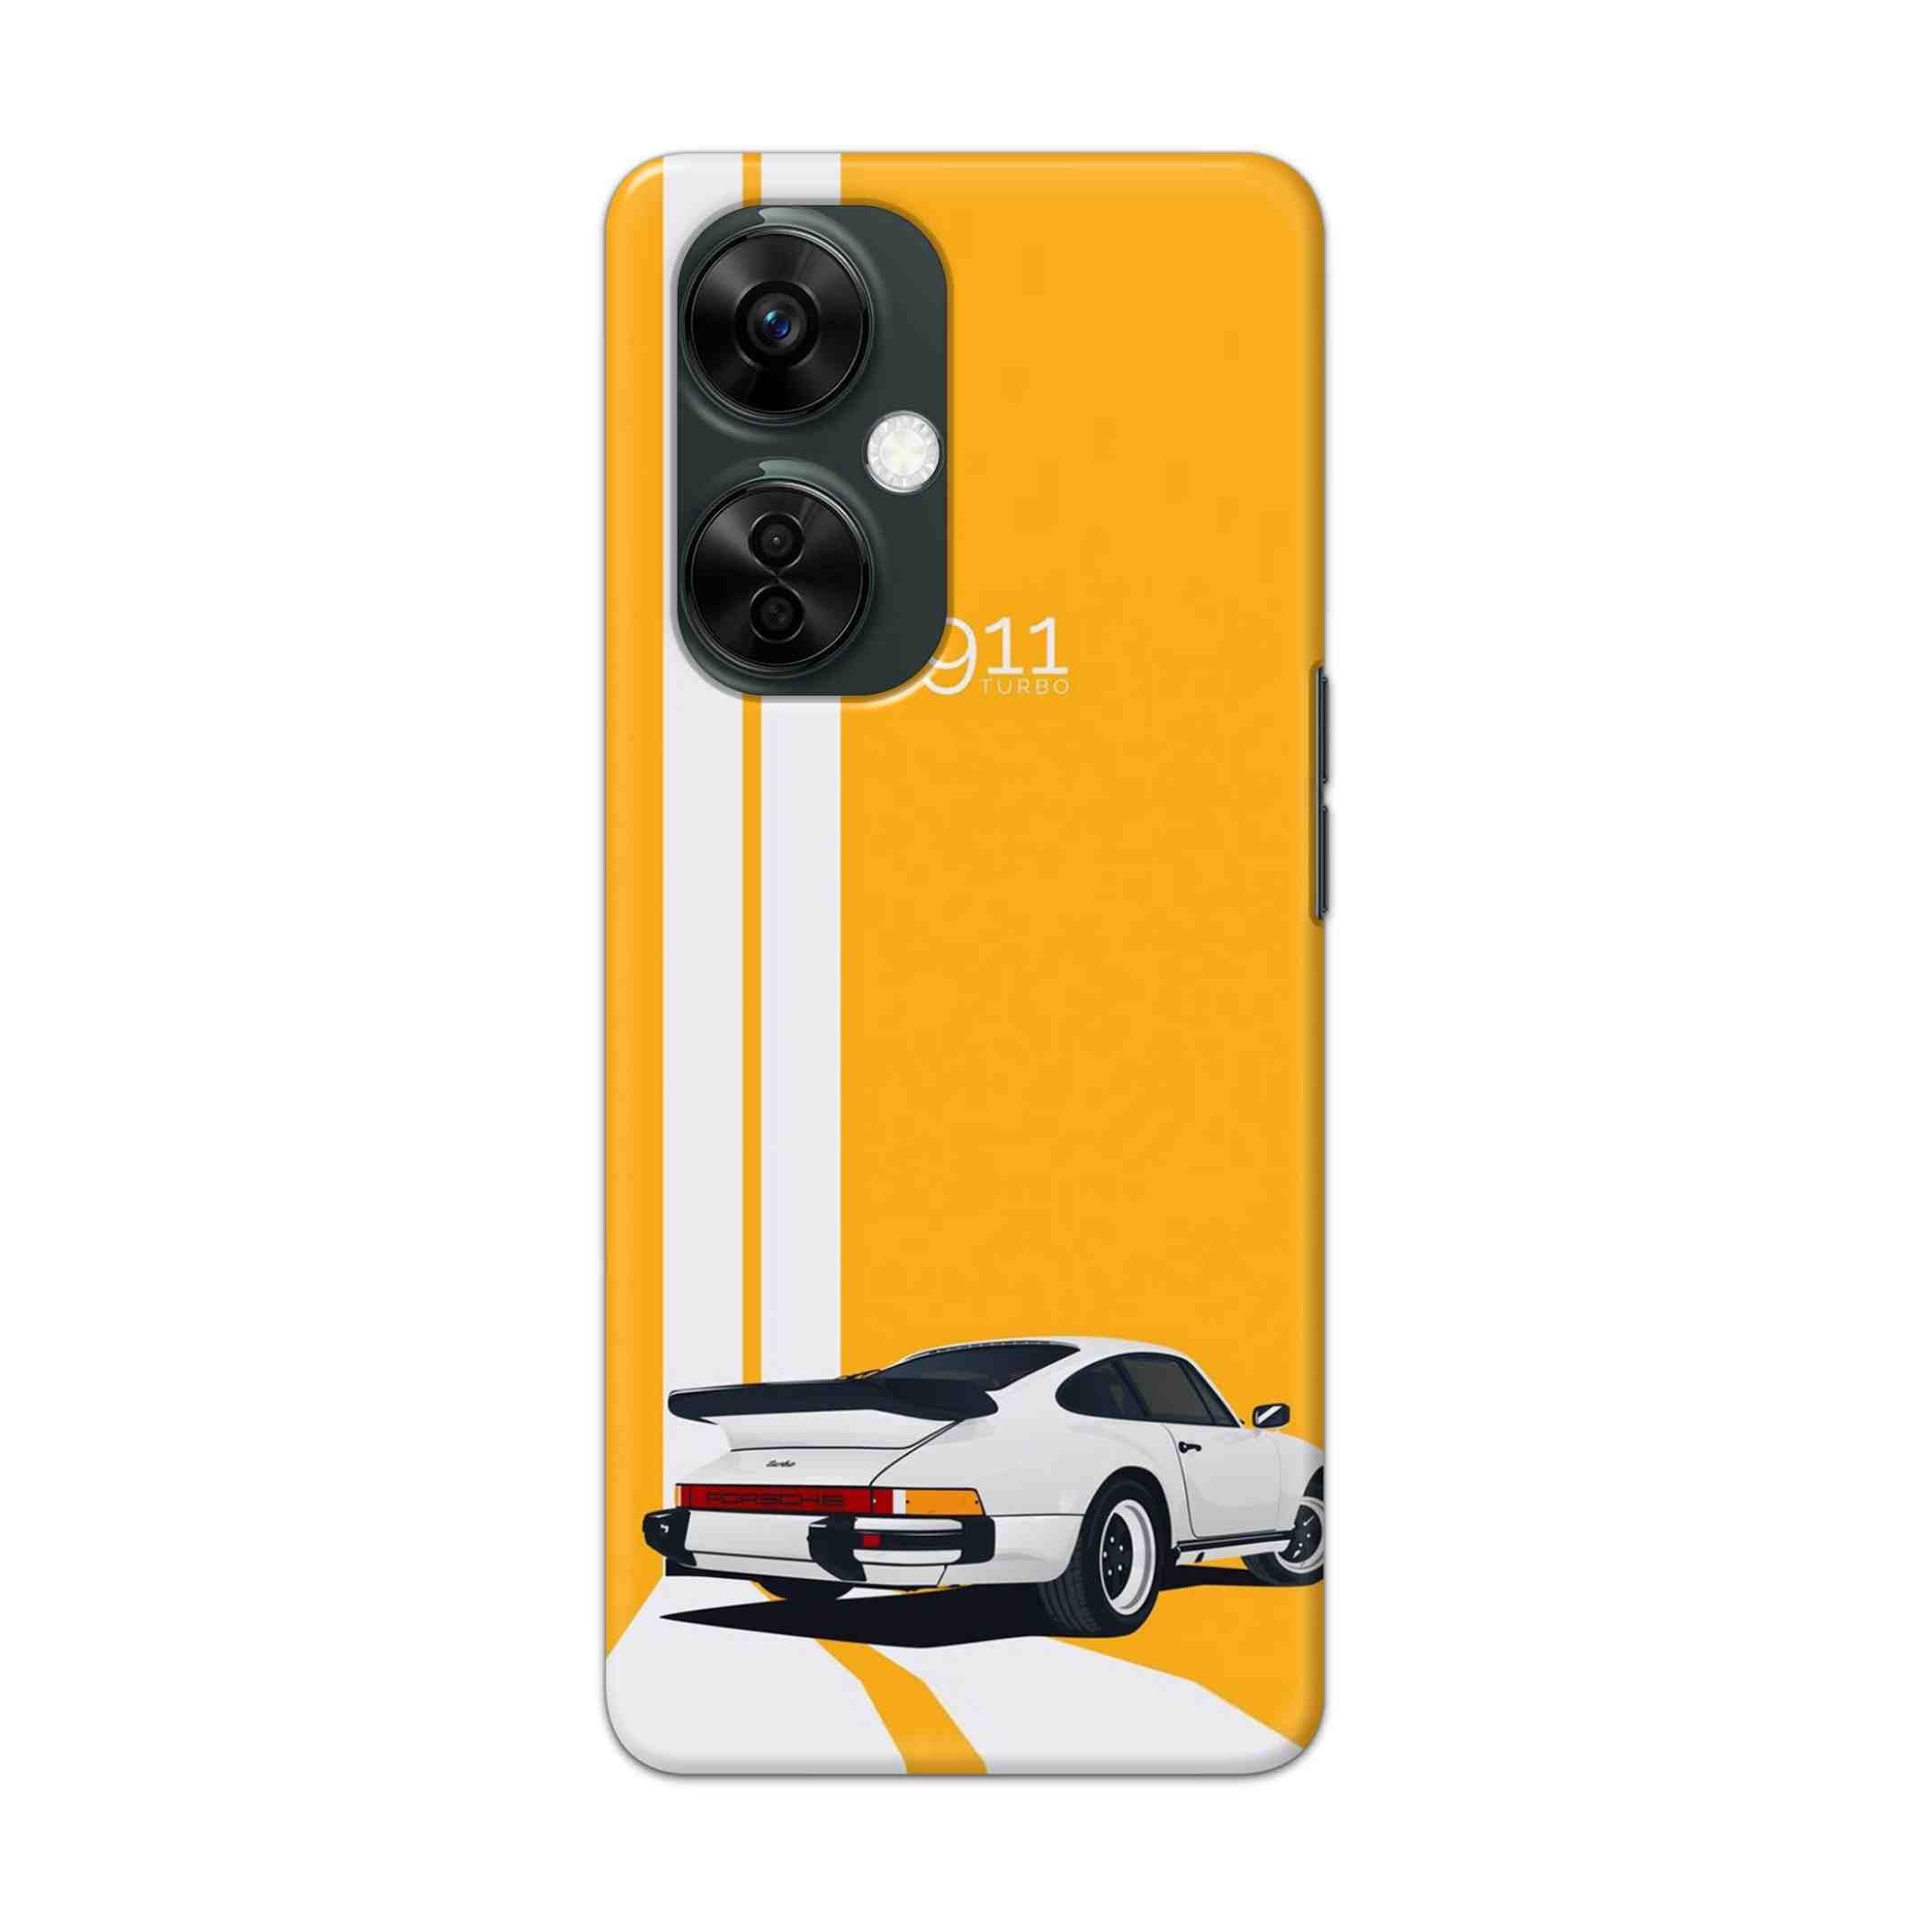 Buy 911 Gt Porche Hard Back Mobile Phone Case Cover For Oneplus Nord CE 3 Lite Online